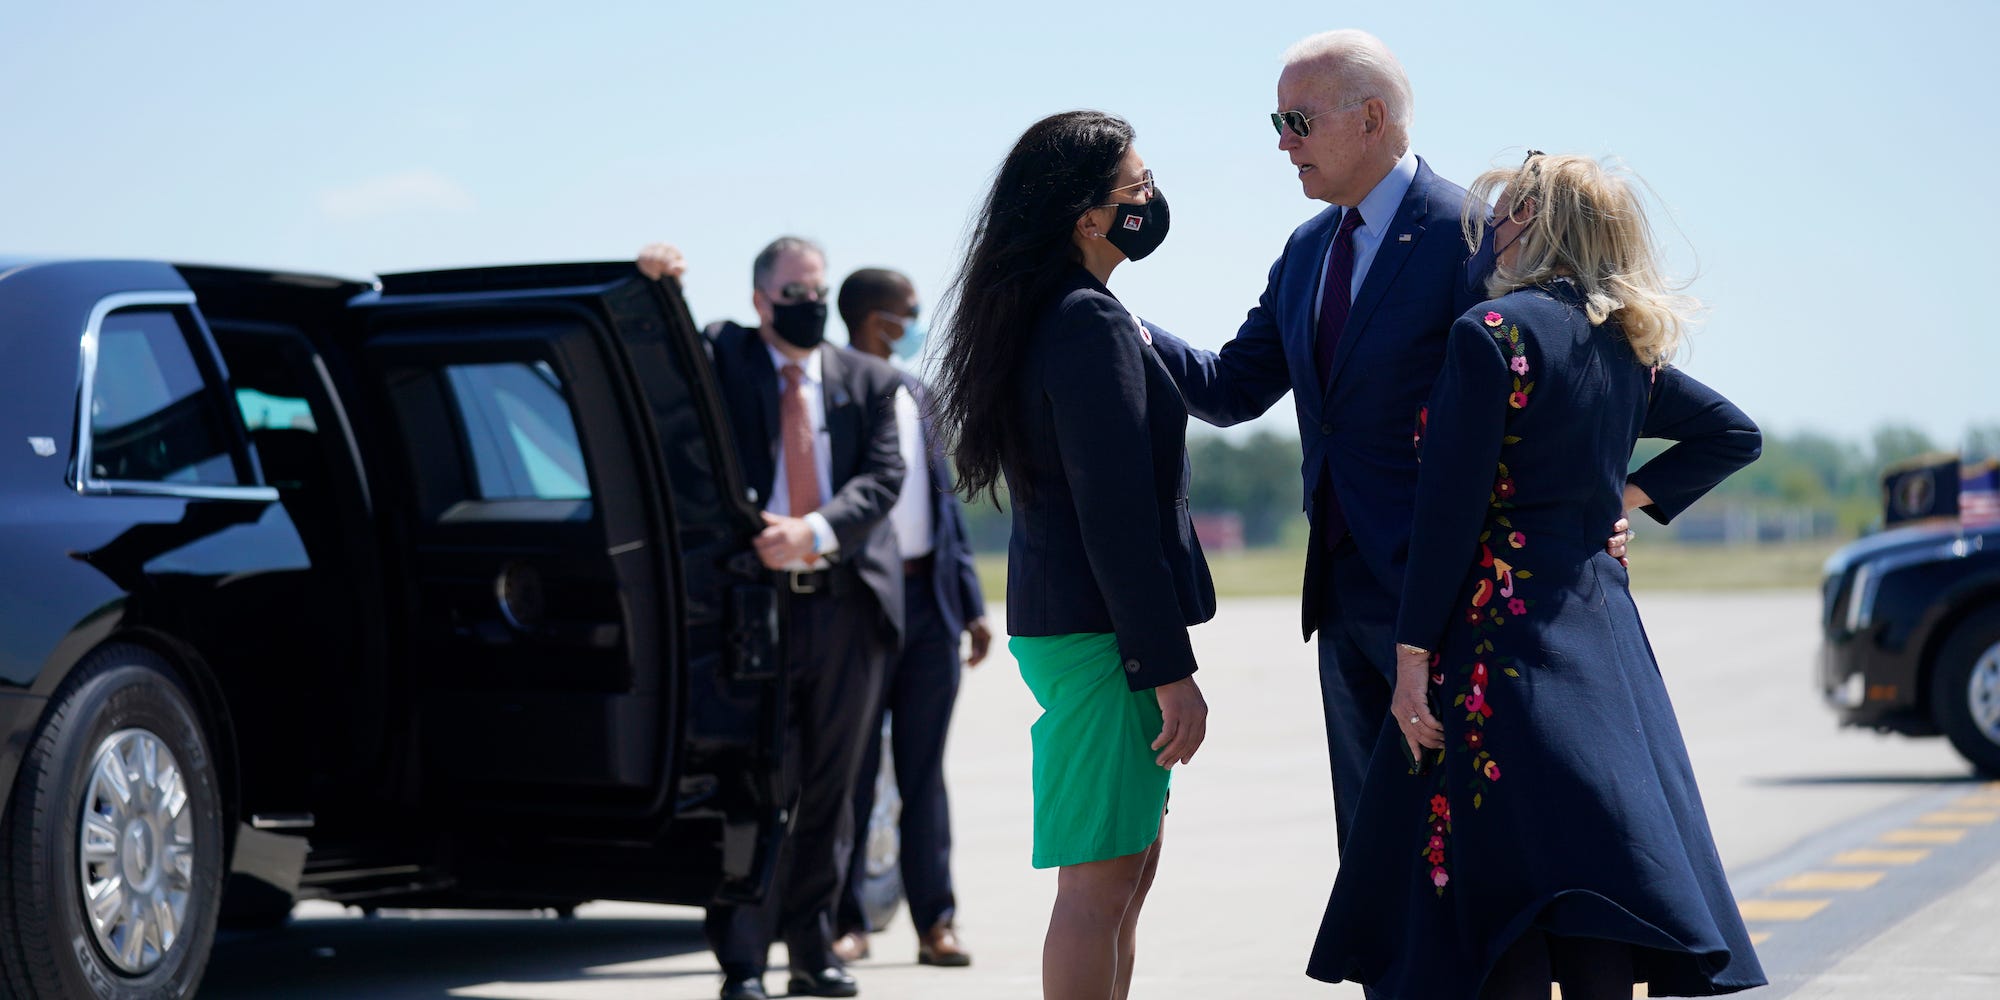 Rep. Tlaib confronts President Biden on the tarmac of the Detroit Metropolitan Wayne County Airport on May 18, 2021.